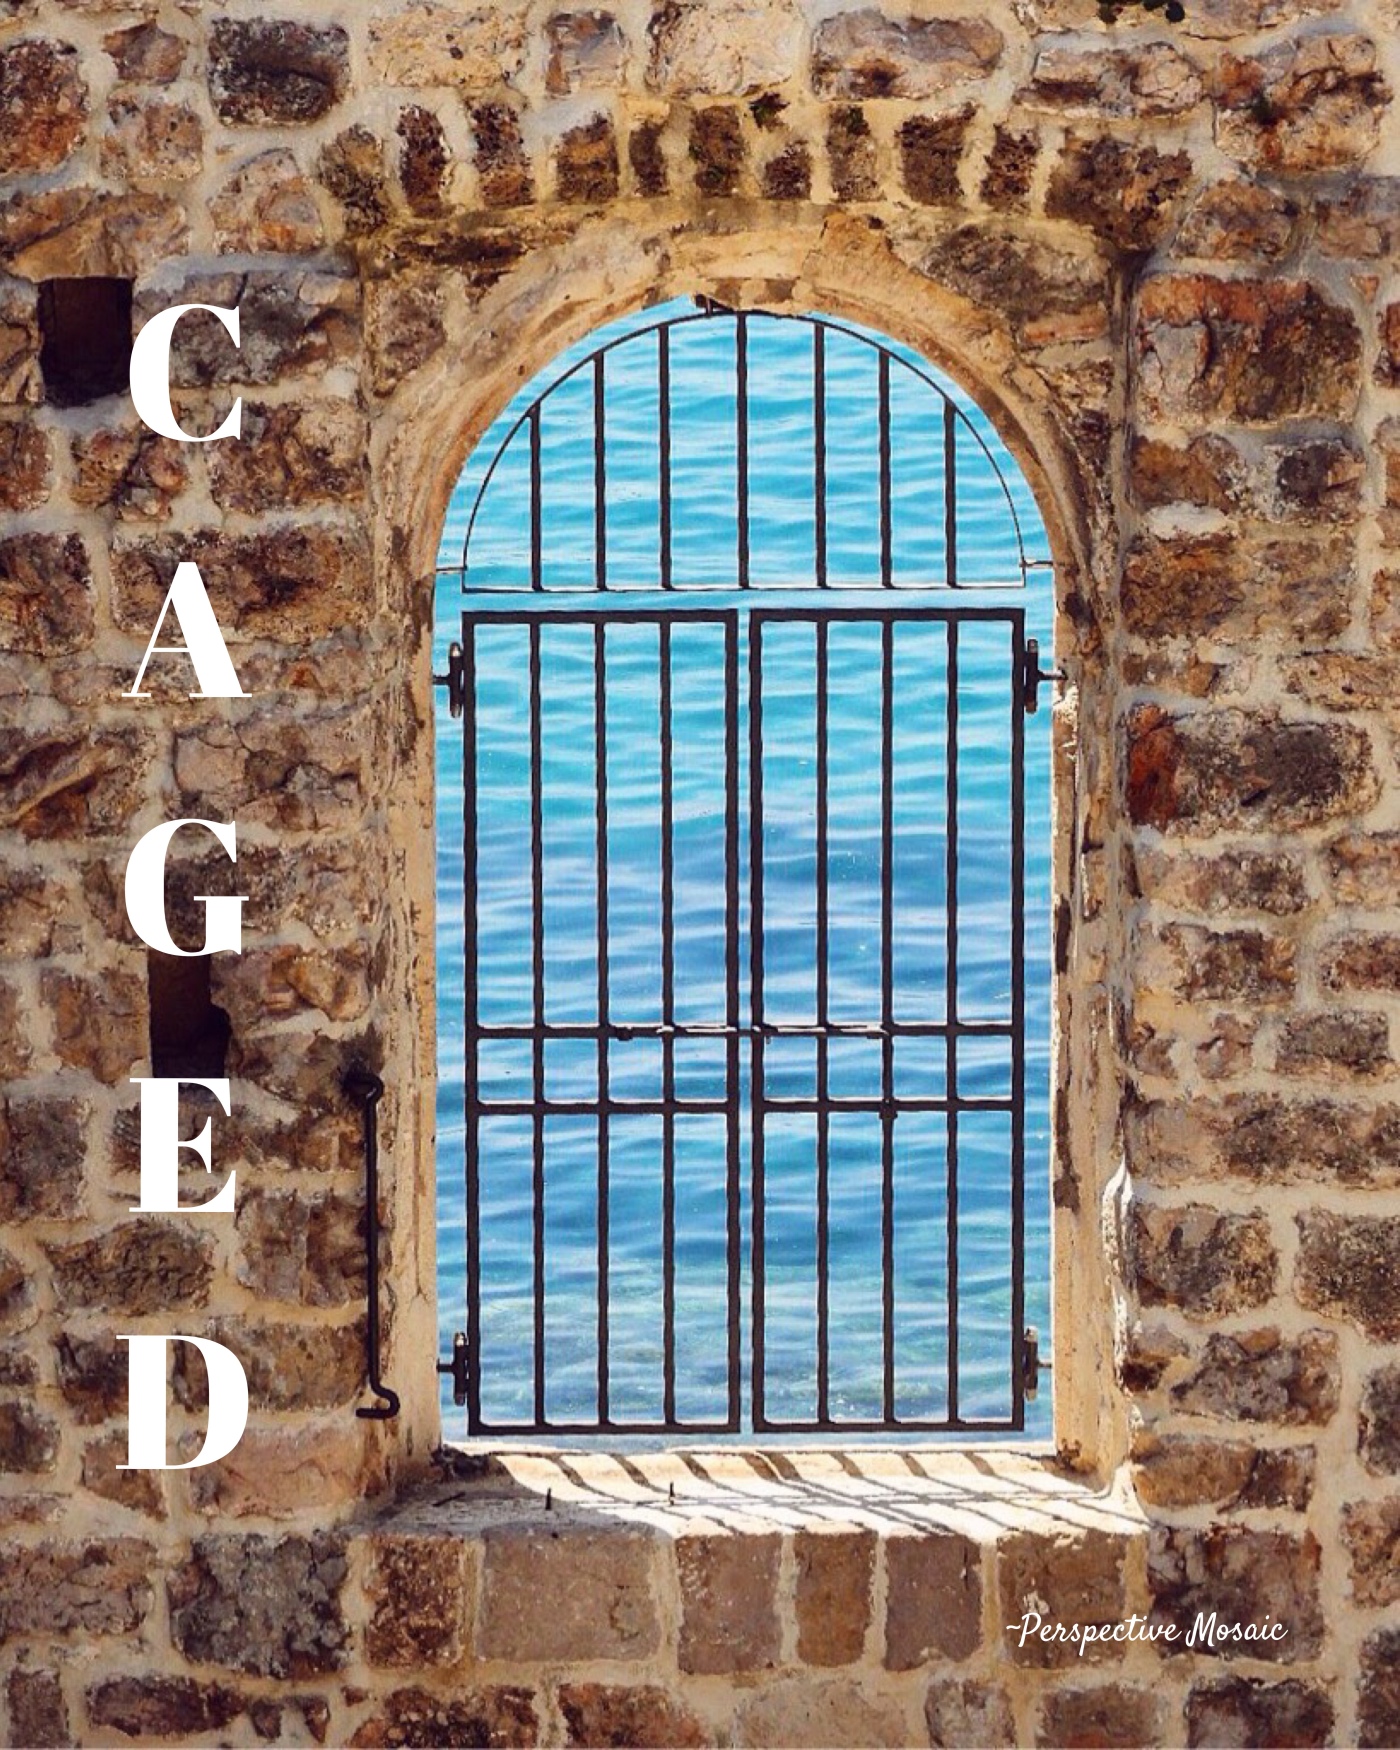 Caged Perspective Mosaic travel sea water